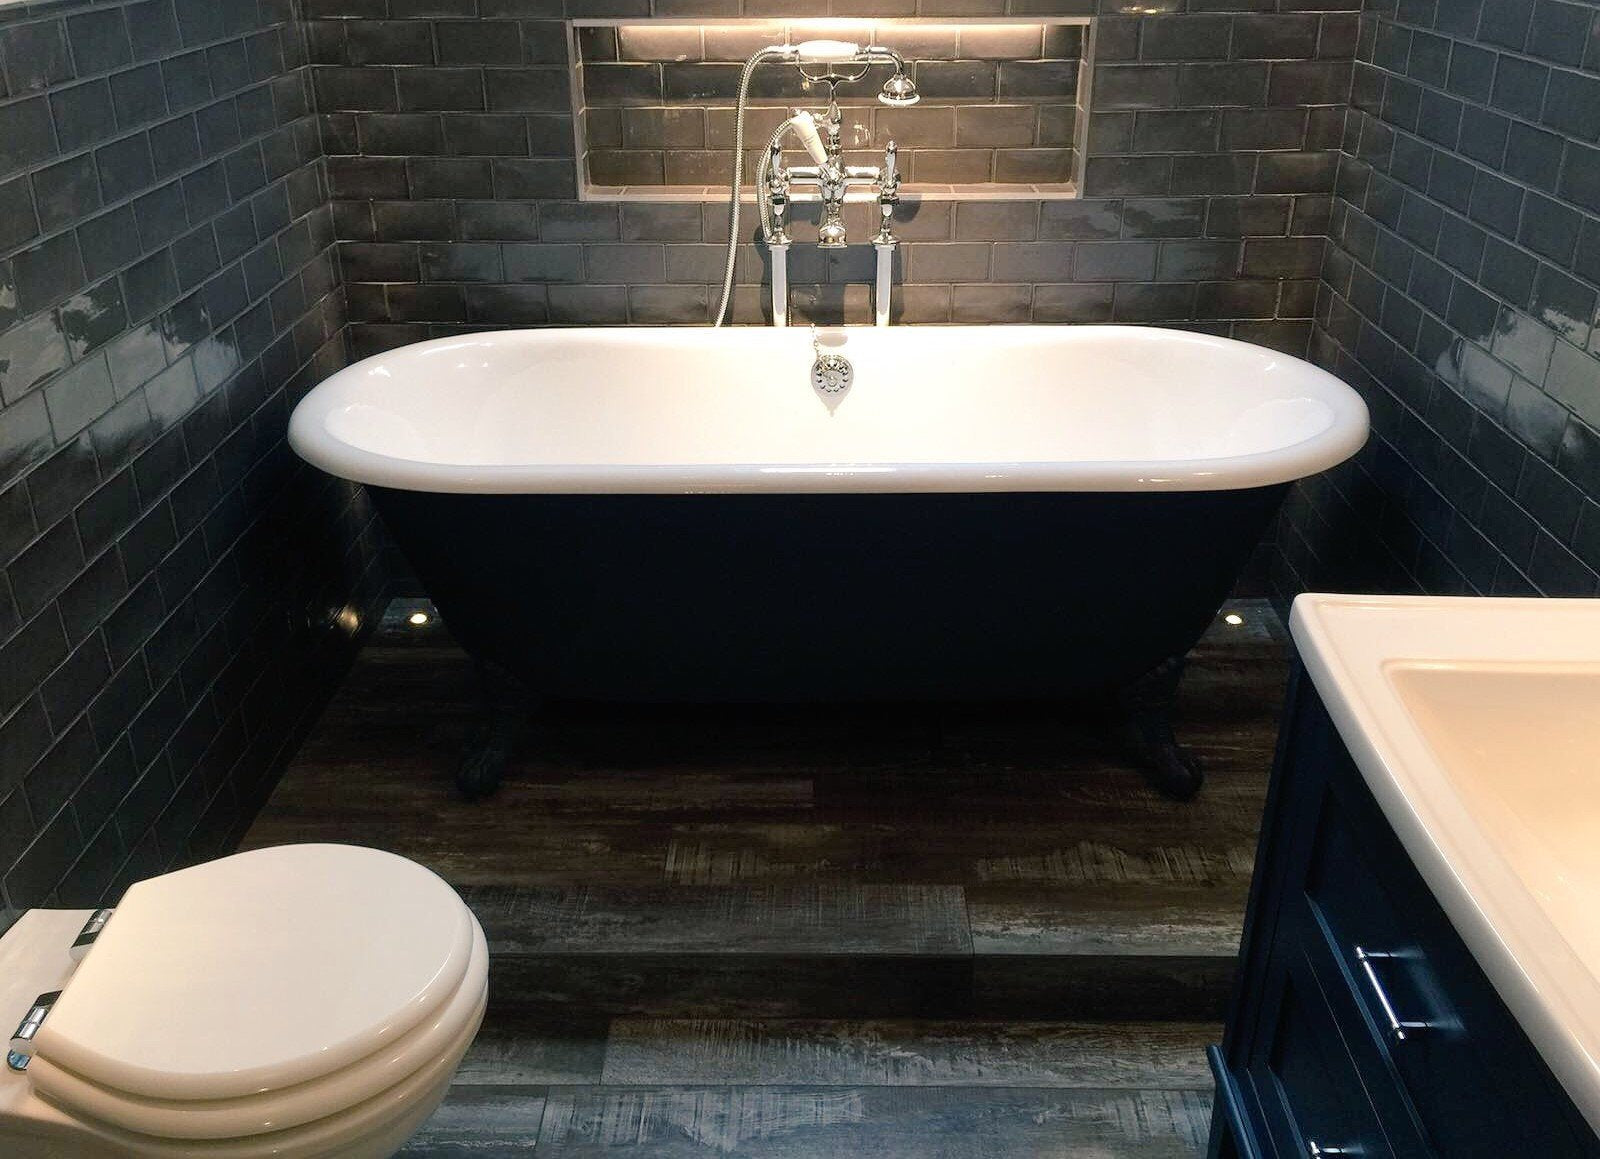 Hints and Tips for achieving perfectly tiled Small Bathrooms...